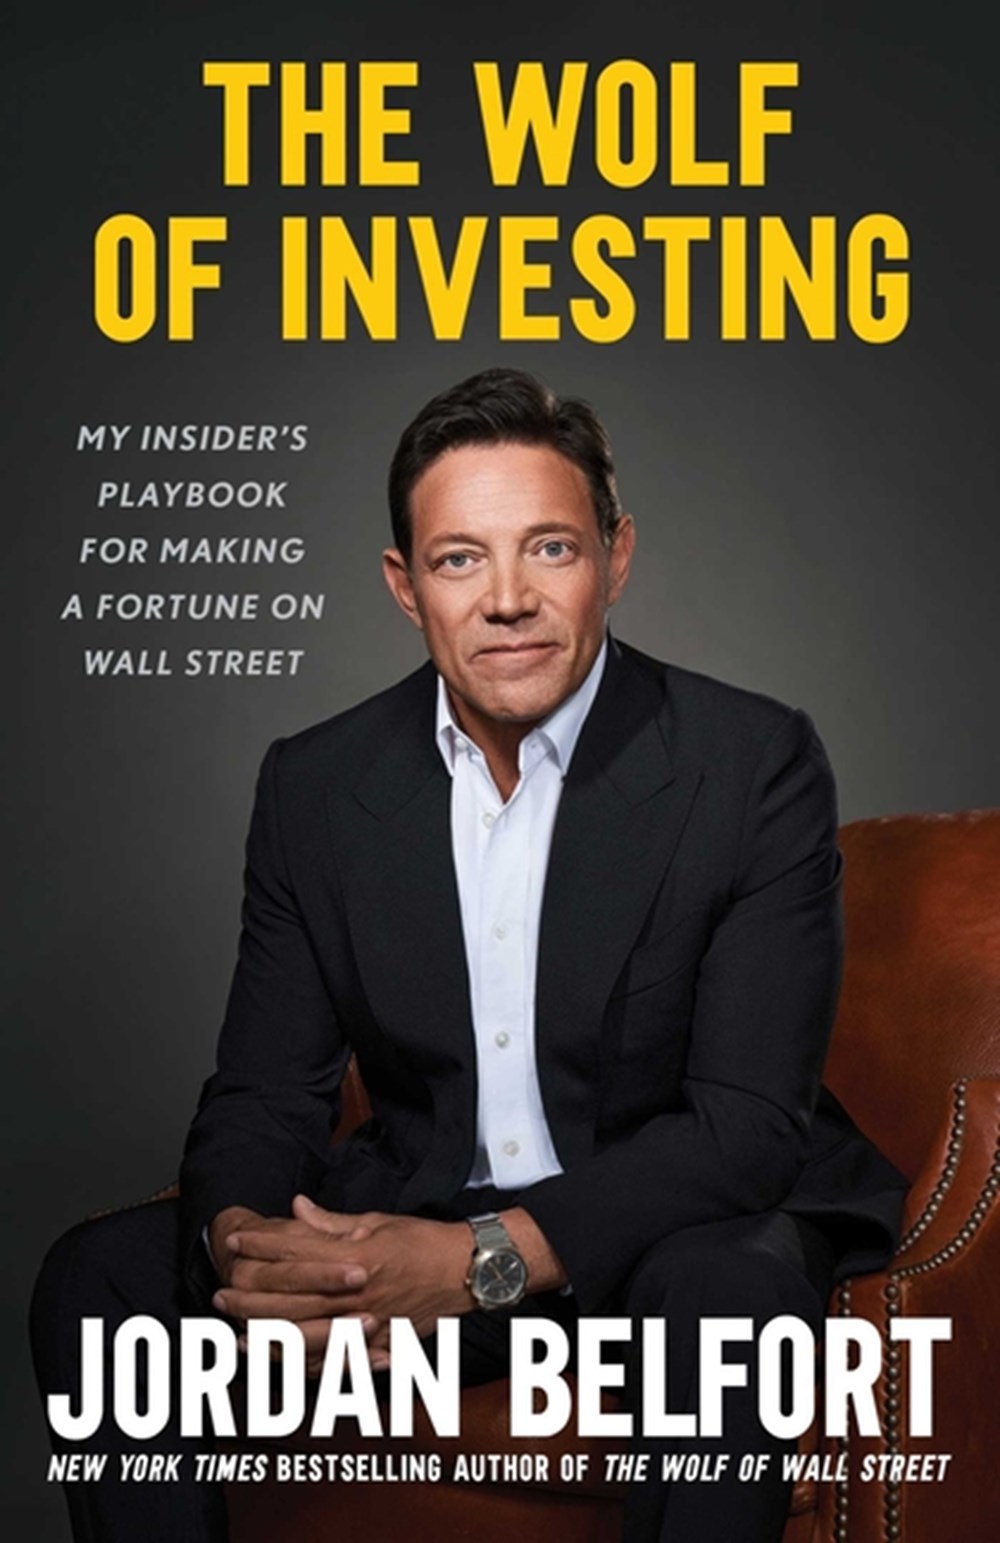 Wolf of Investing: My Insider's Playbook for Making a Fortune on Wall Street